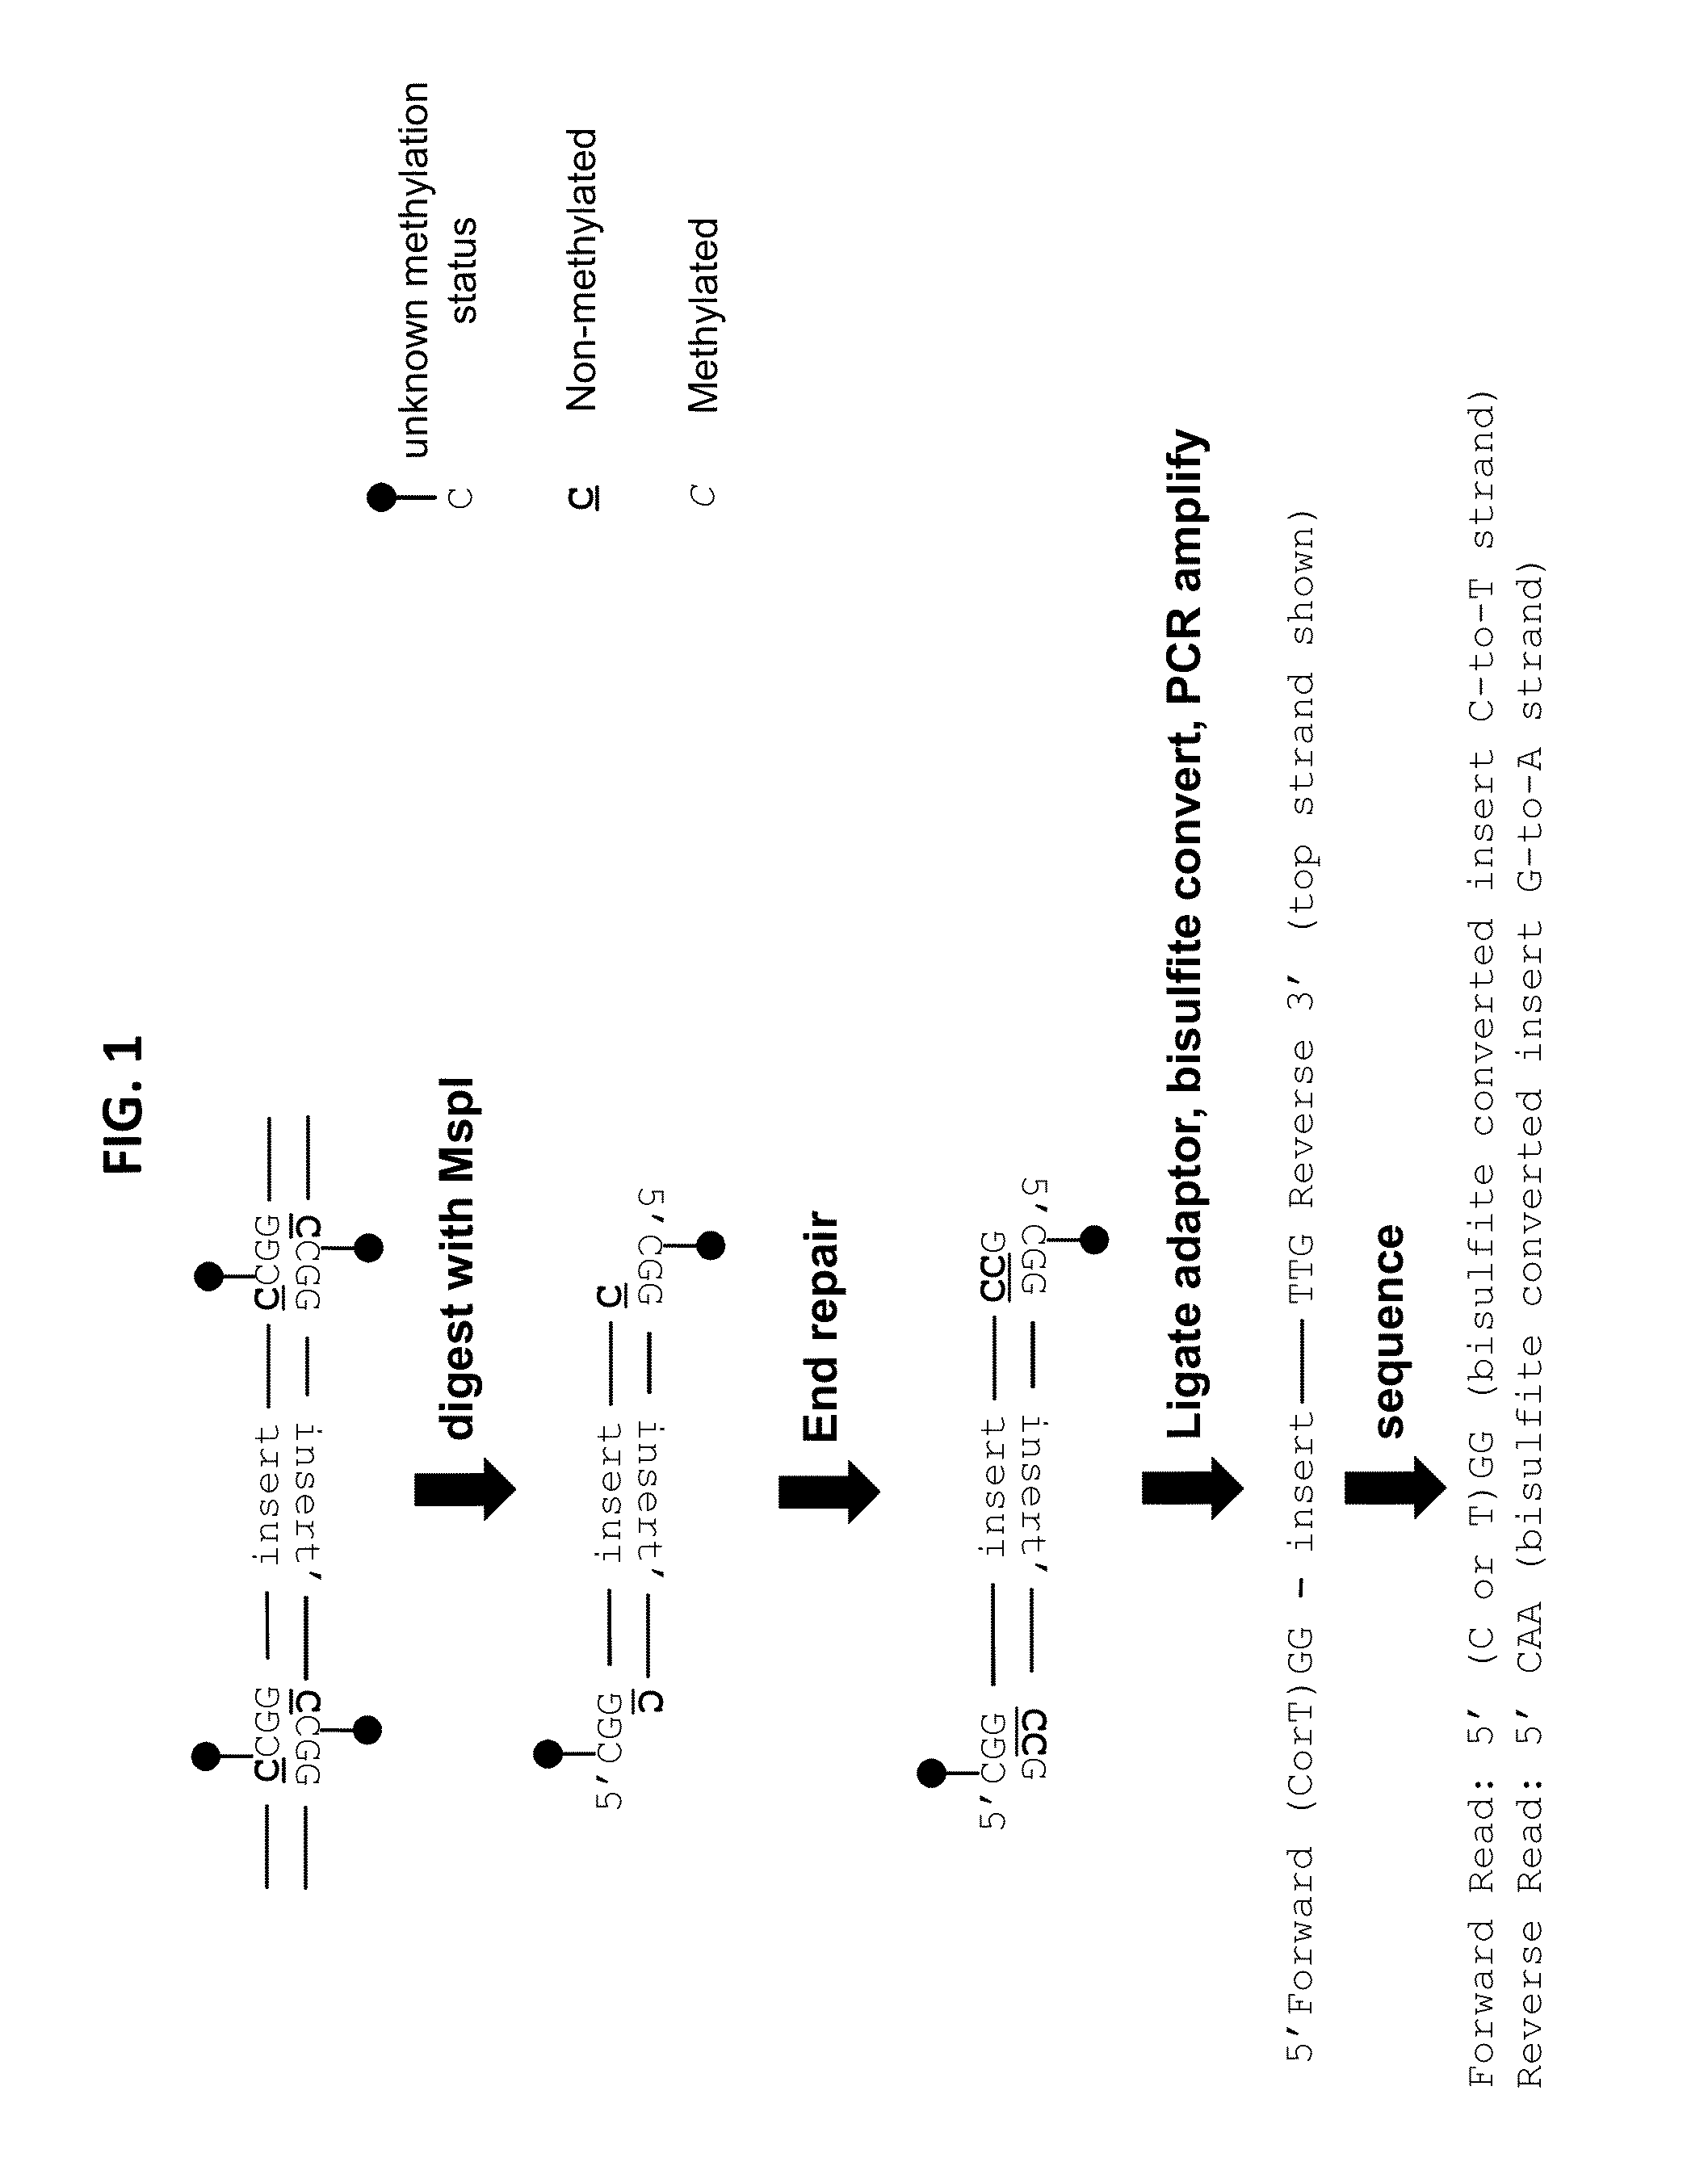 Reduced representation bisulfite sequencing with diversity adaptors